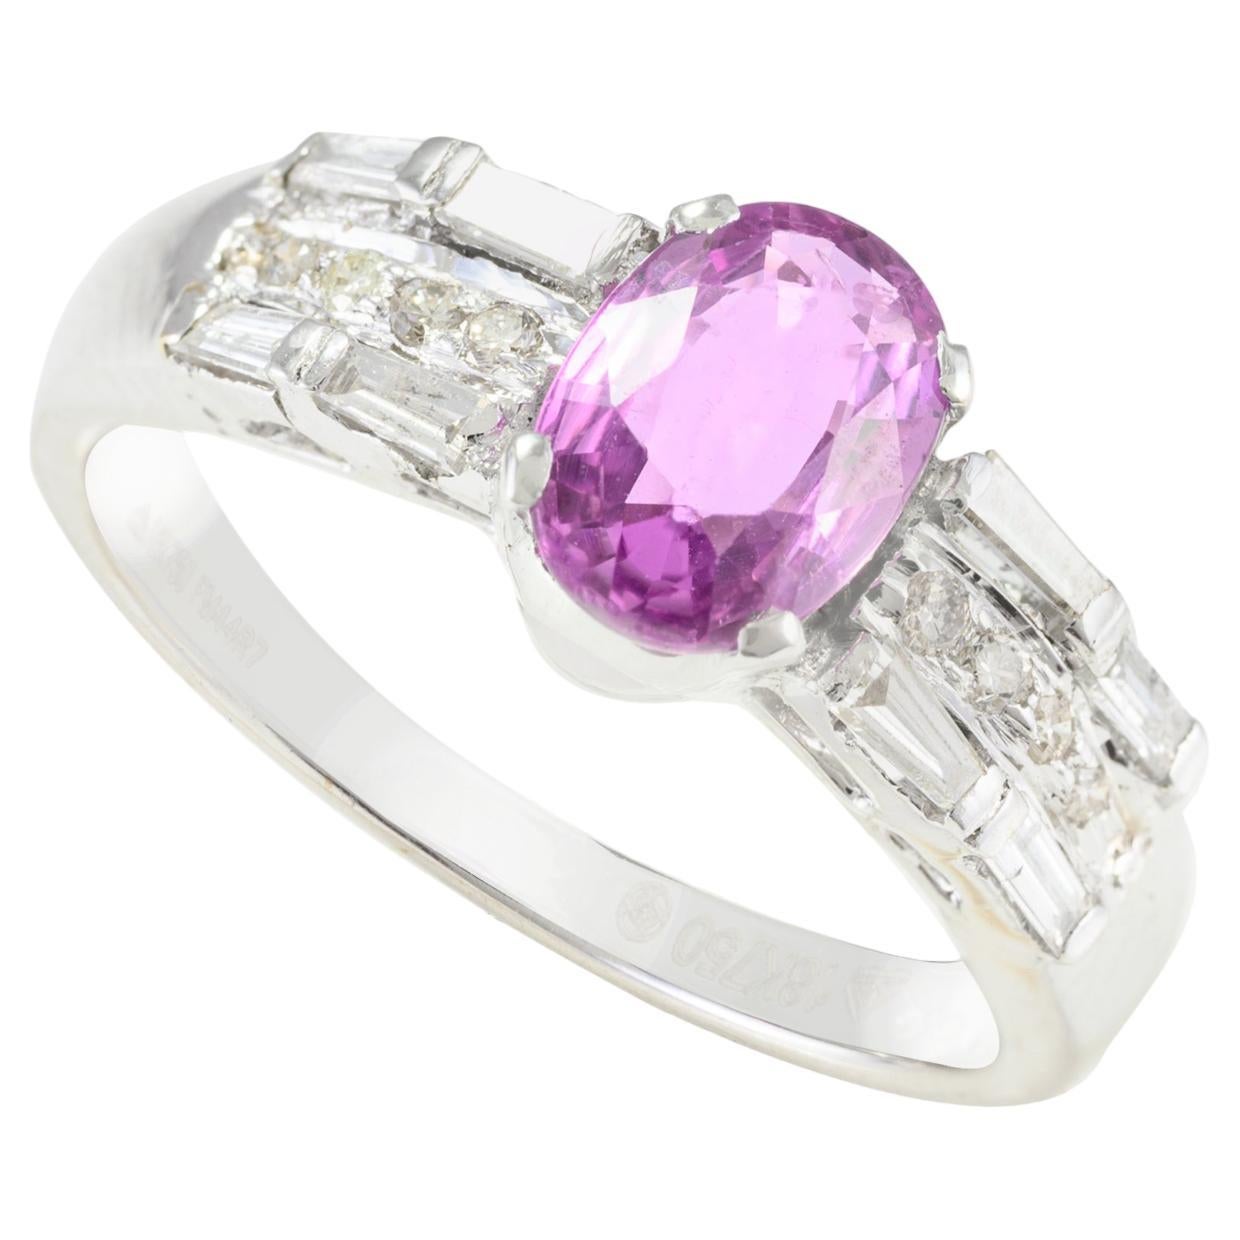 For Sale:  Oval Pink Sapphire Diamond Wedding Ring for Women in 18k White Gold